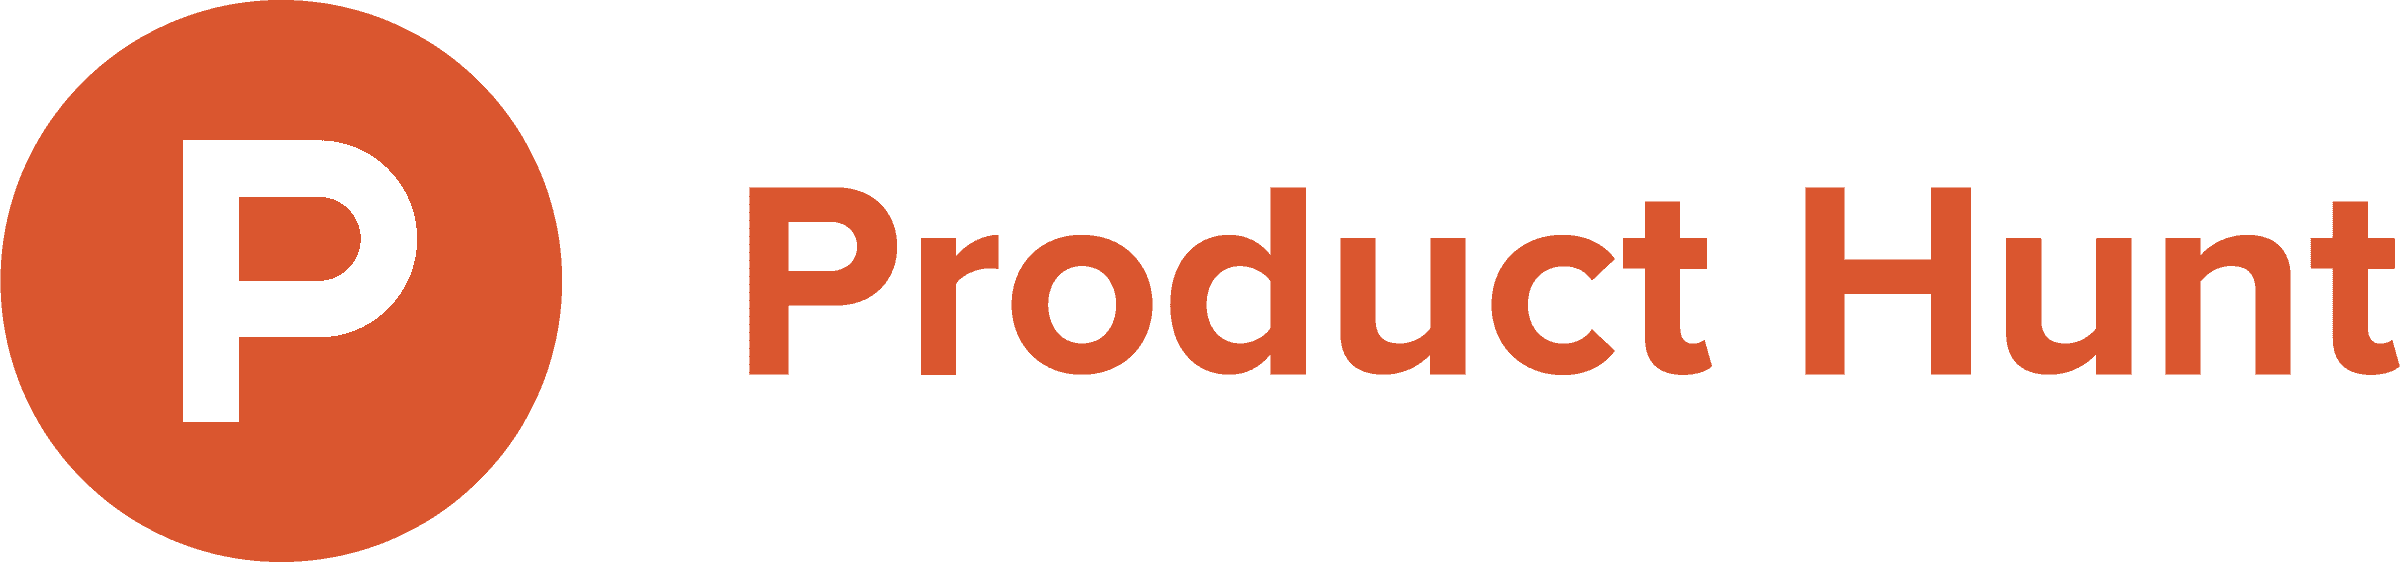 Scheduled featured on Product Hunt